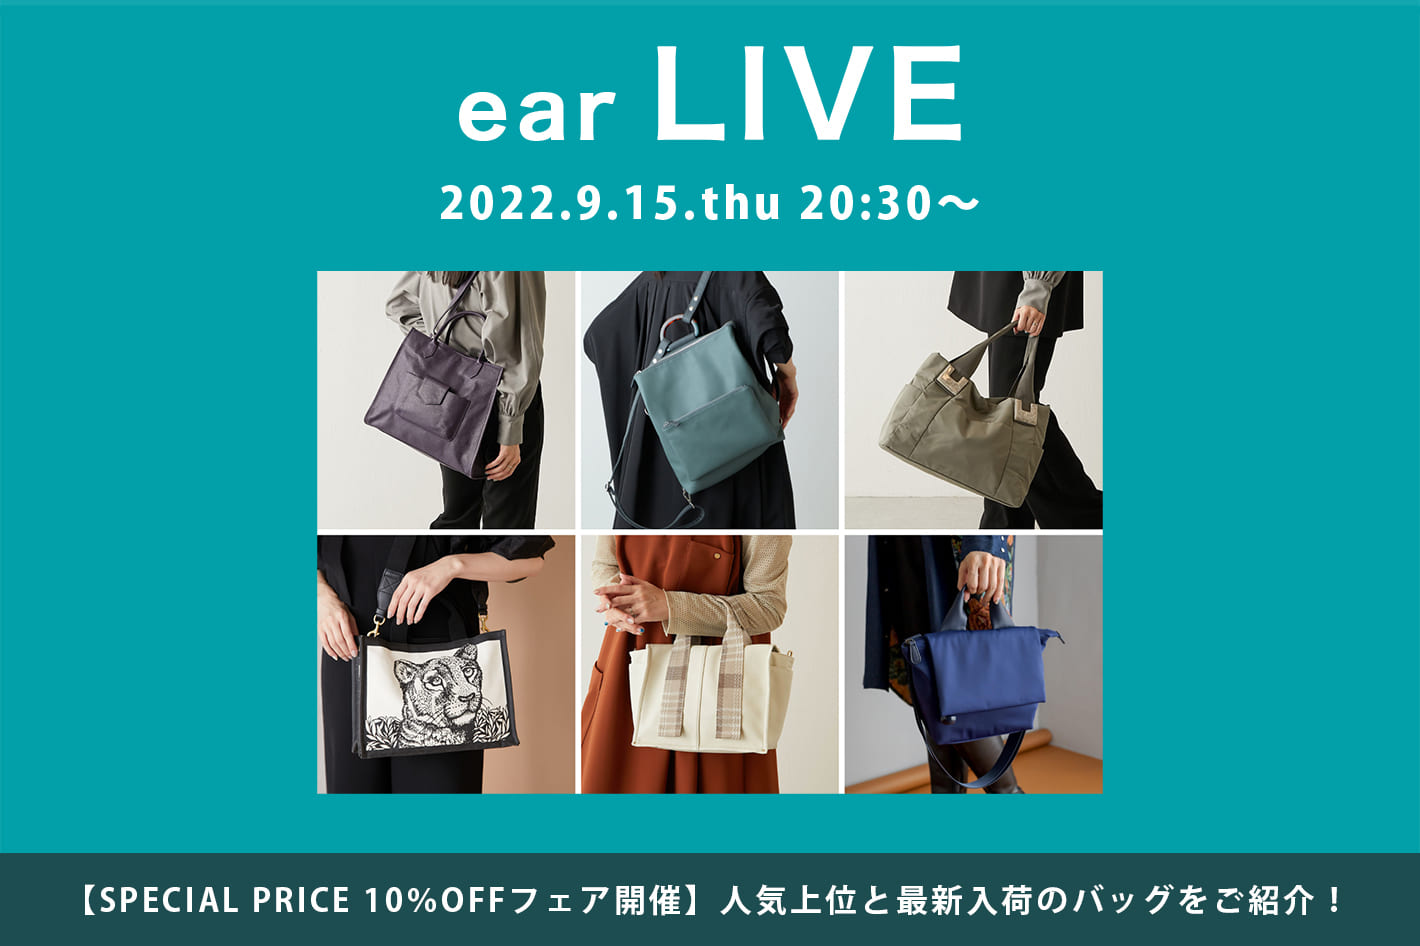 ear PAPILLONNER 9/15 (木) 20:30～ライブ配信 <br>【SPECIAL PRICE 10%OFF】人気上位と最新入荷のバッグをご紹介！